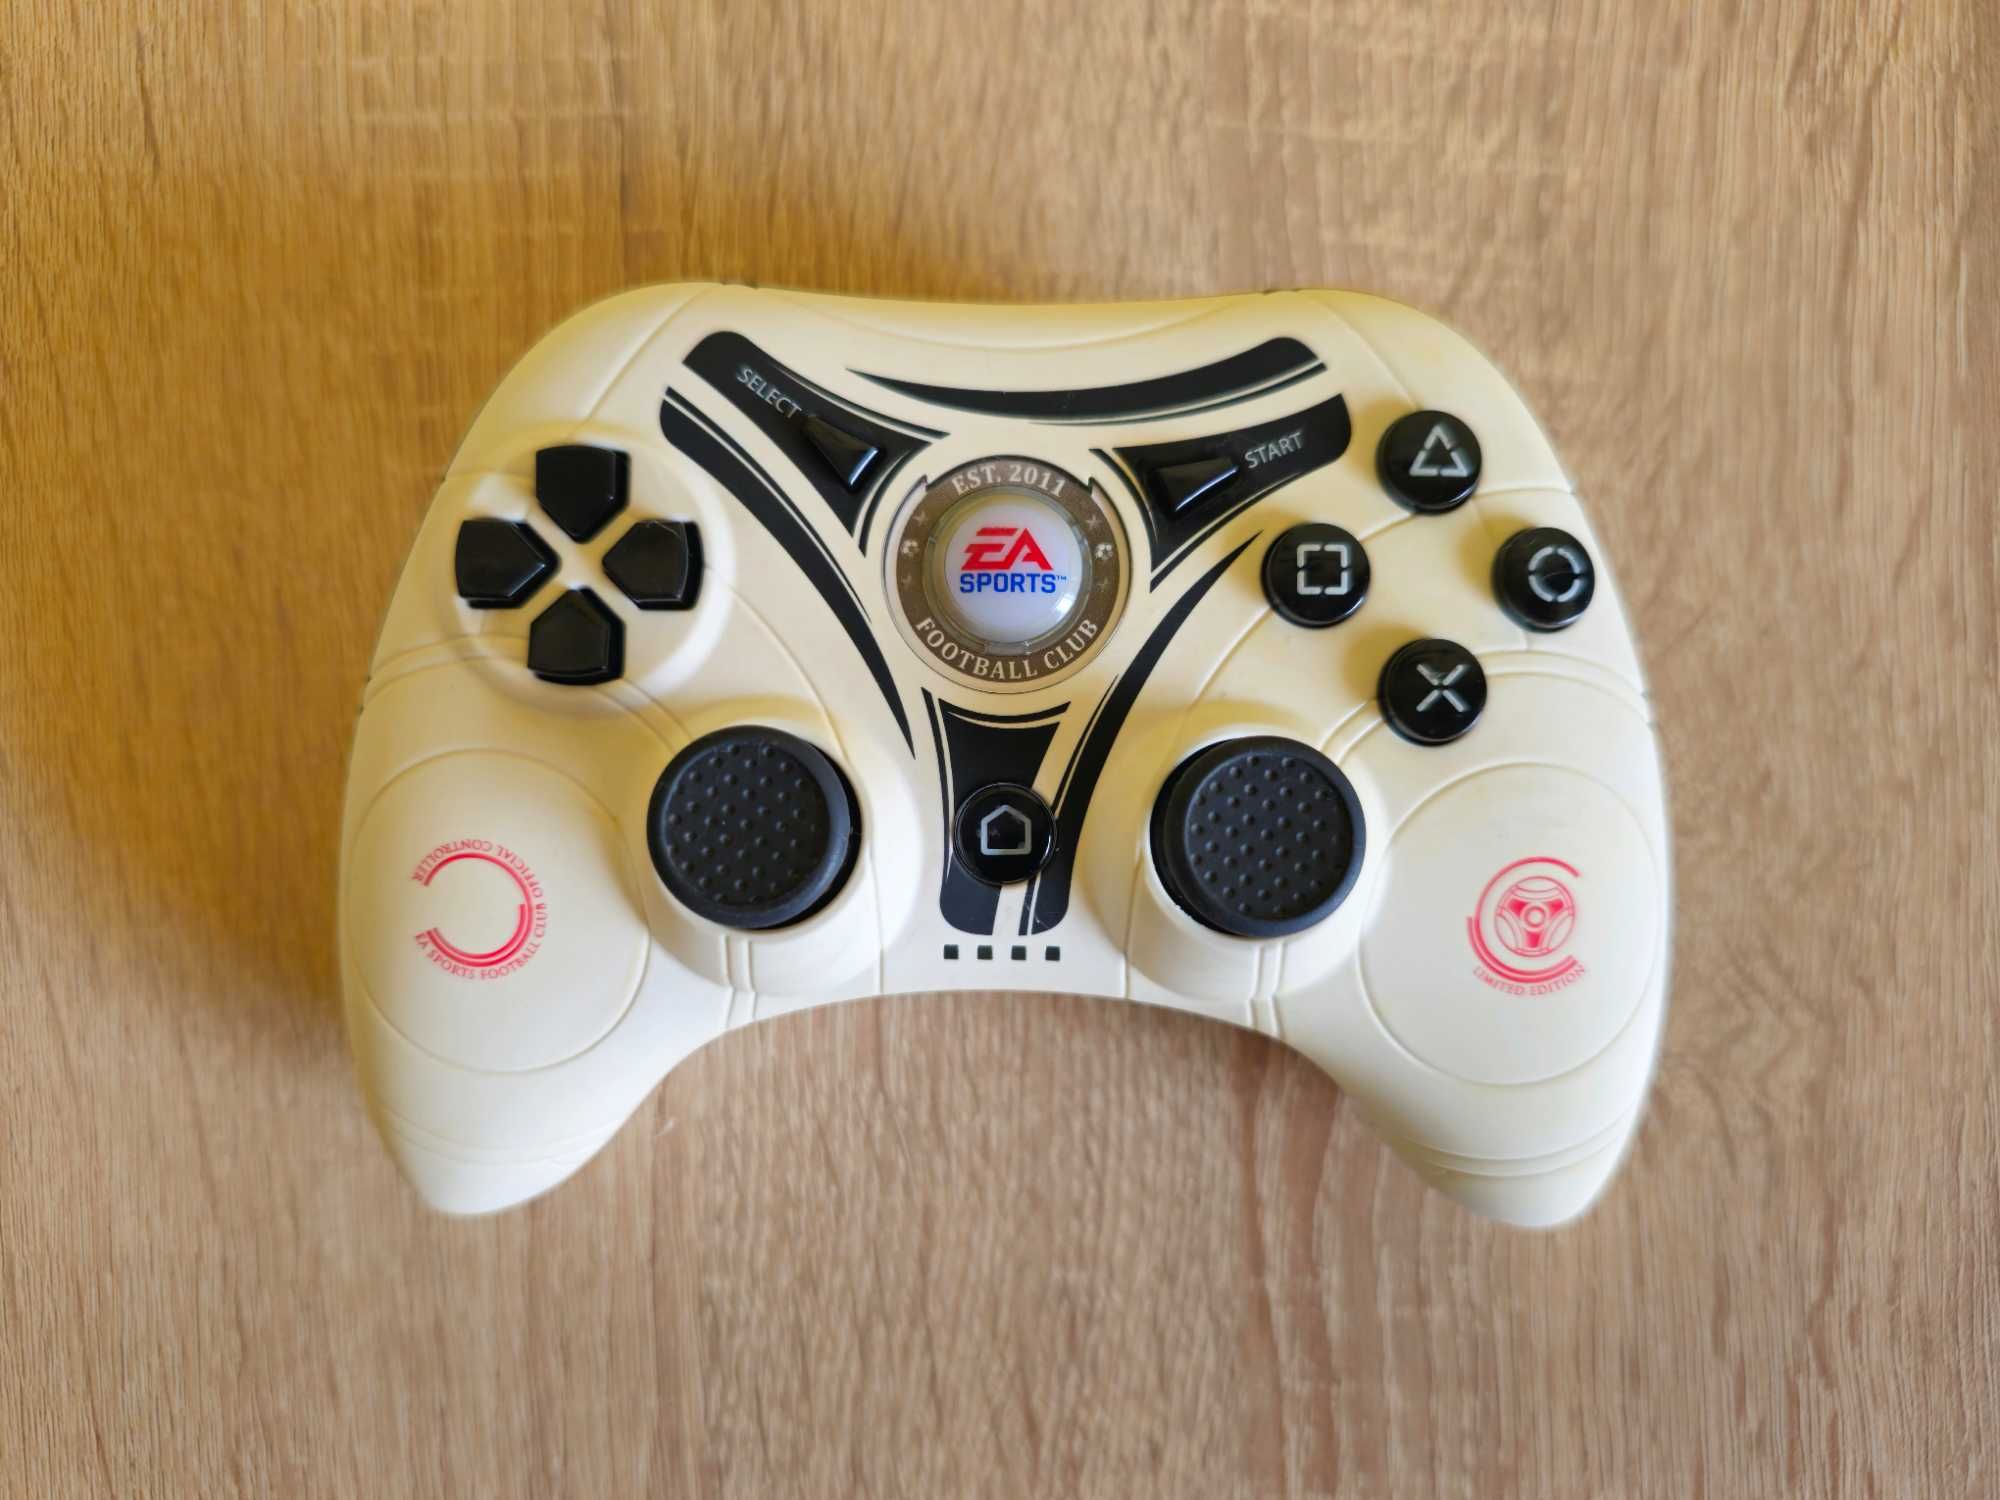 Джойстик за Playstation 3 / PC EA Sports Official FIFA Controller